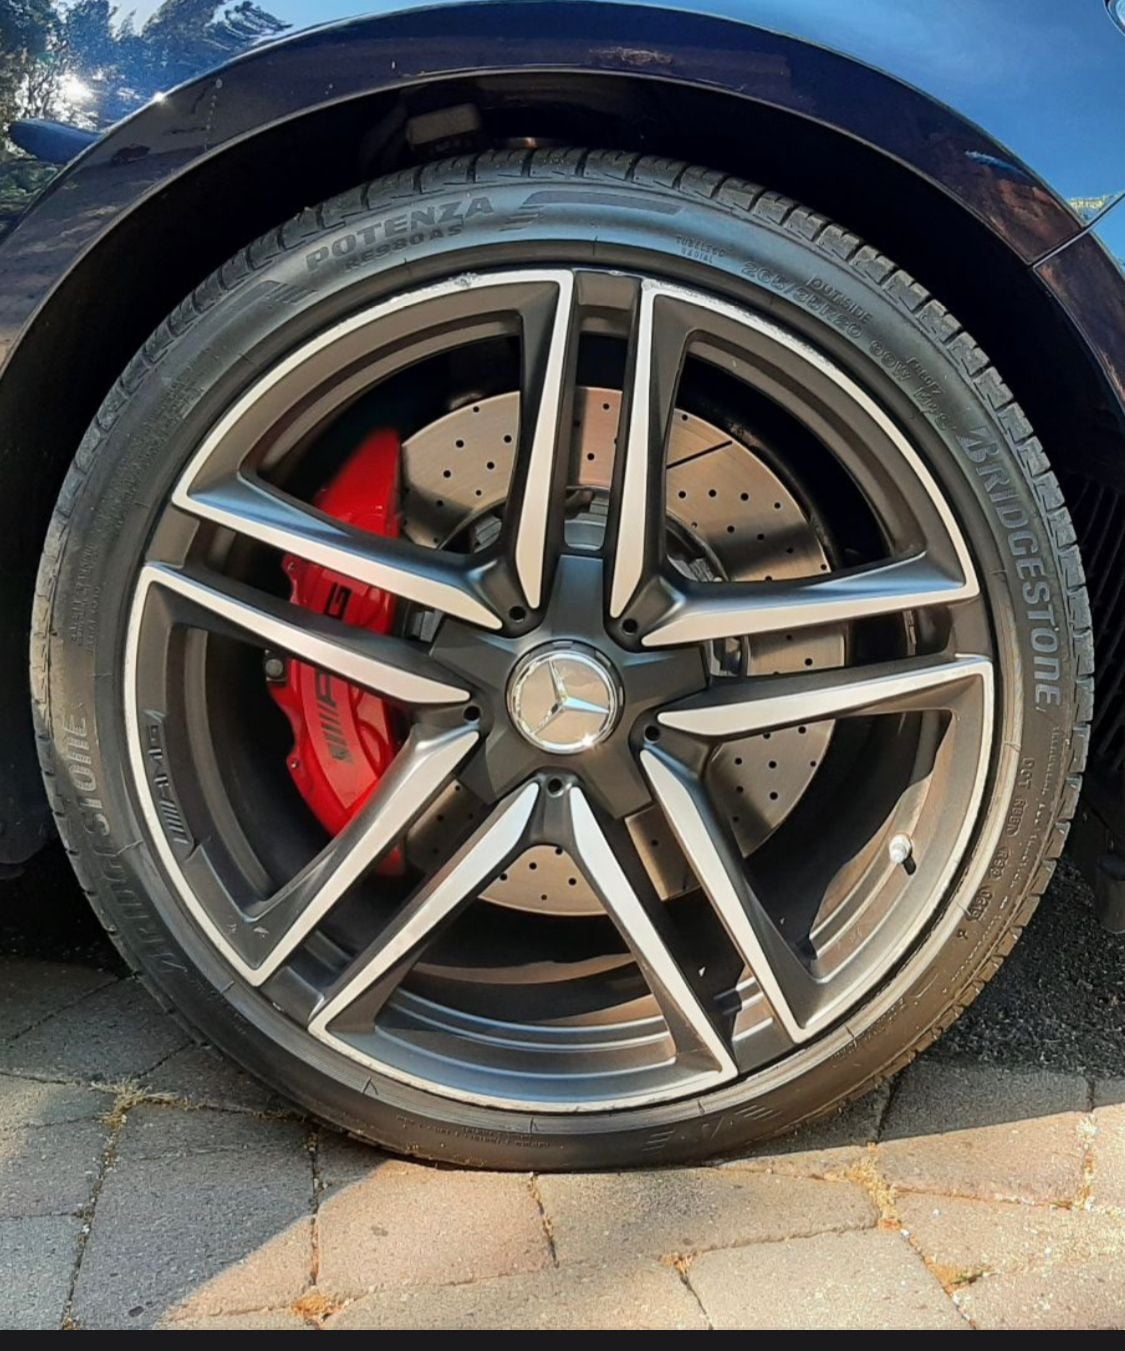 Wheels and Tires/Axles - W213 E63s Factory OEM 20” Wheels with Good A/S Tires - DC/MD/VA - Used - Washington, DC 20003, United States